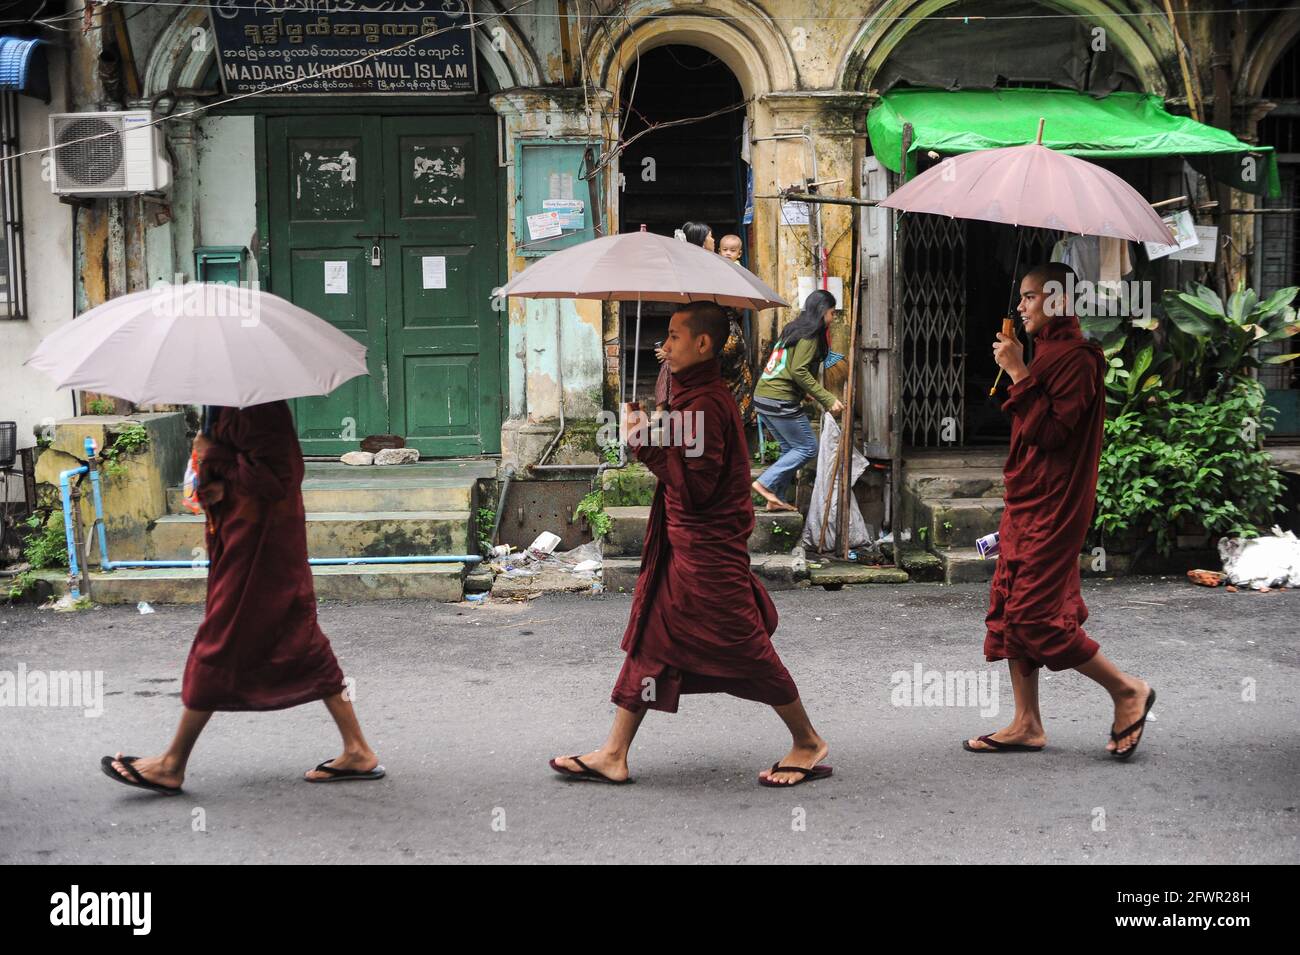 20.07.2014, Yangon, Myanmar, Asia - A group of Buddhist monks in their saffron robes holding umbrellas walks through the streets of downtown Yangon. Stock Photo